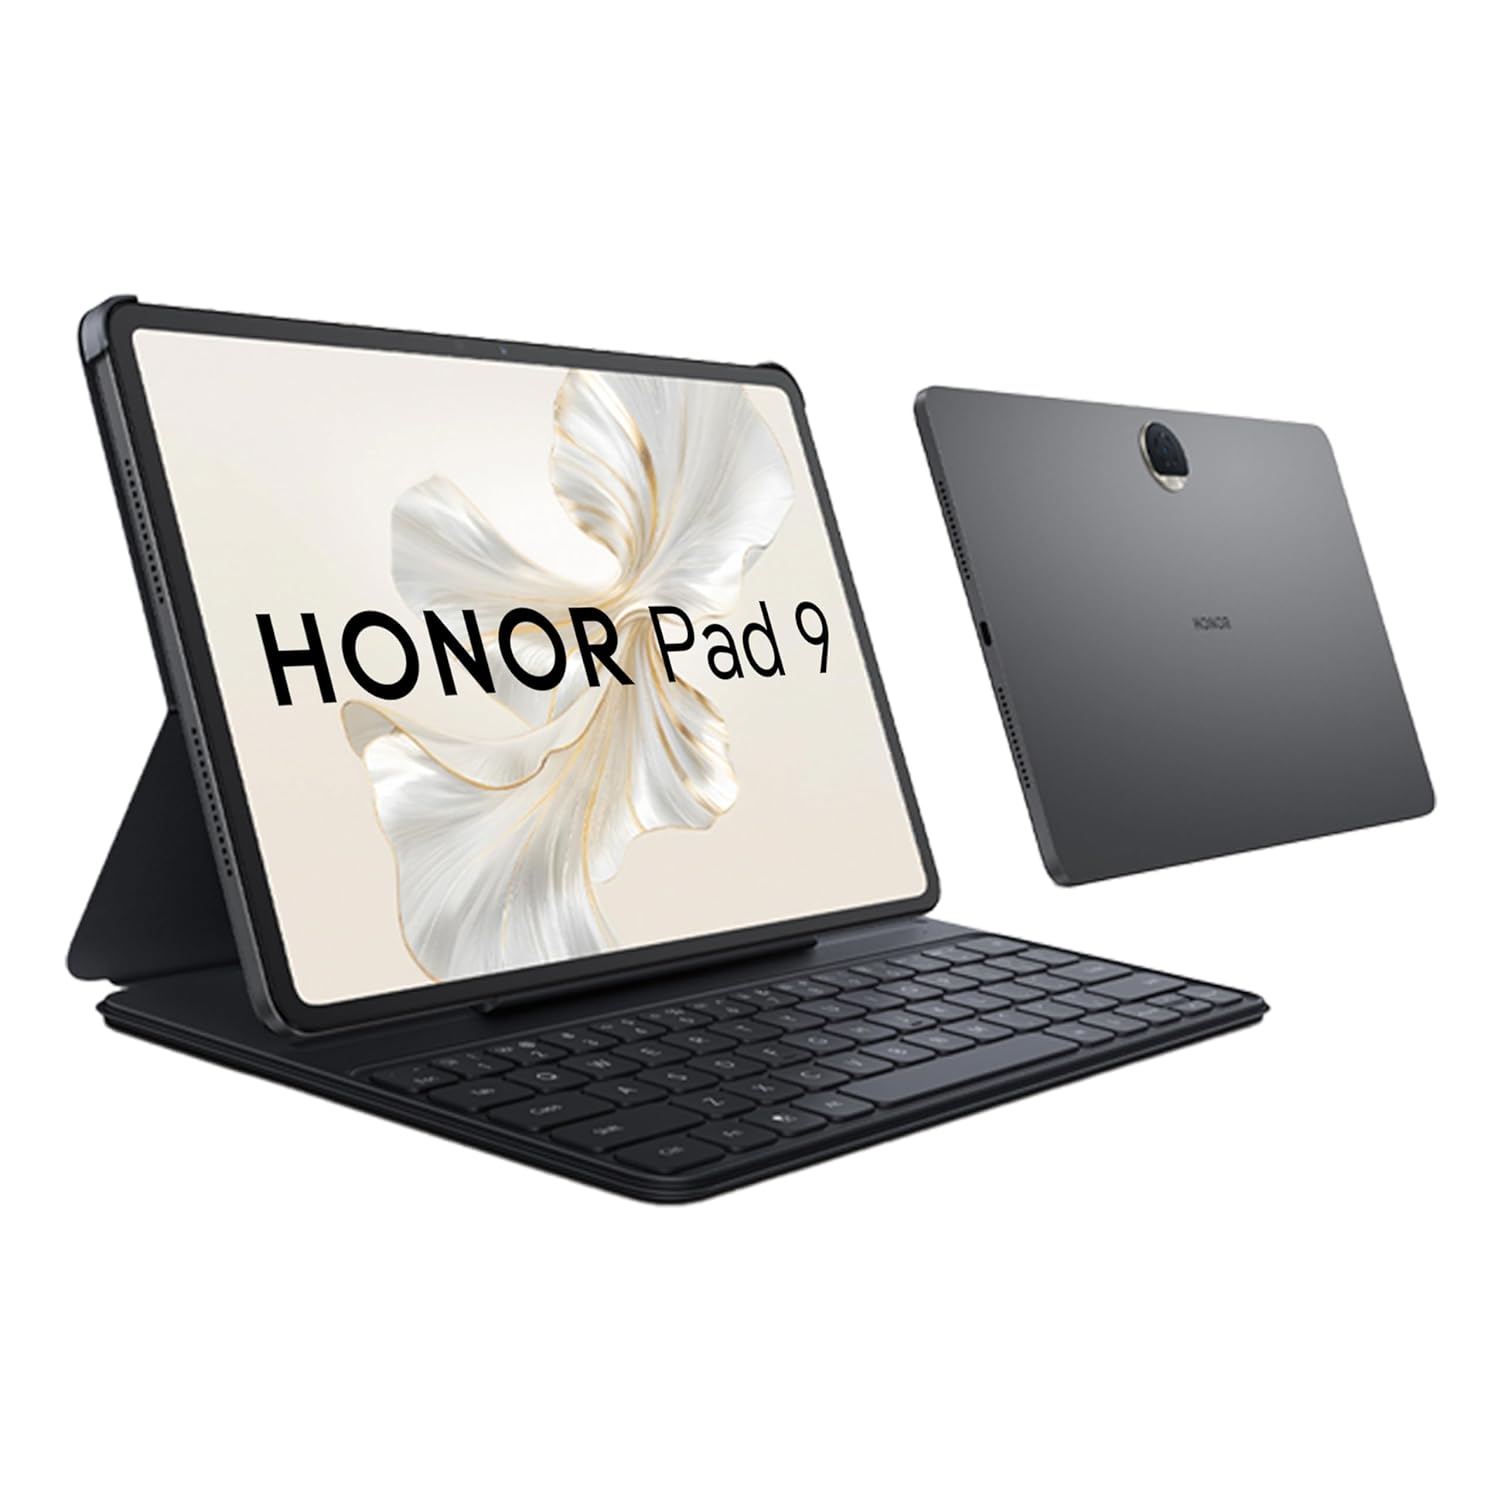 Honor Pad 9: Now on Sale in India with Exciting Offers